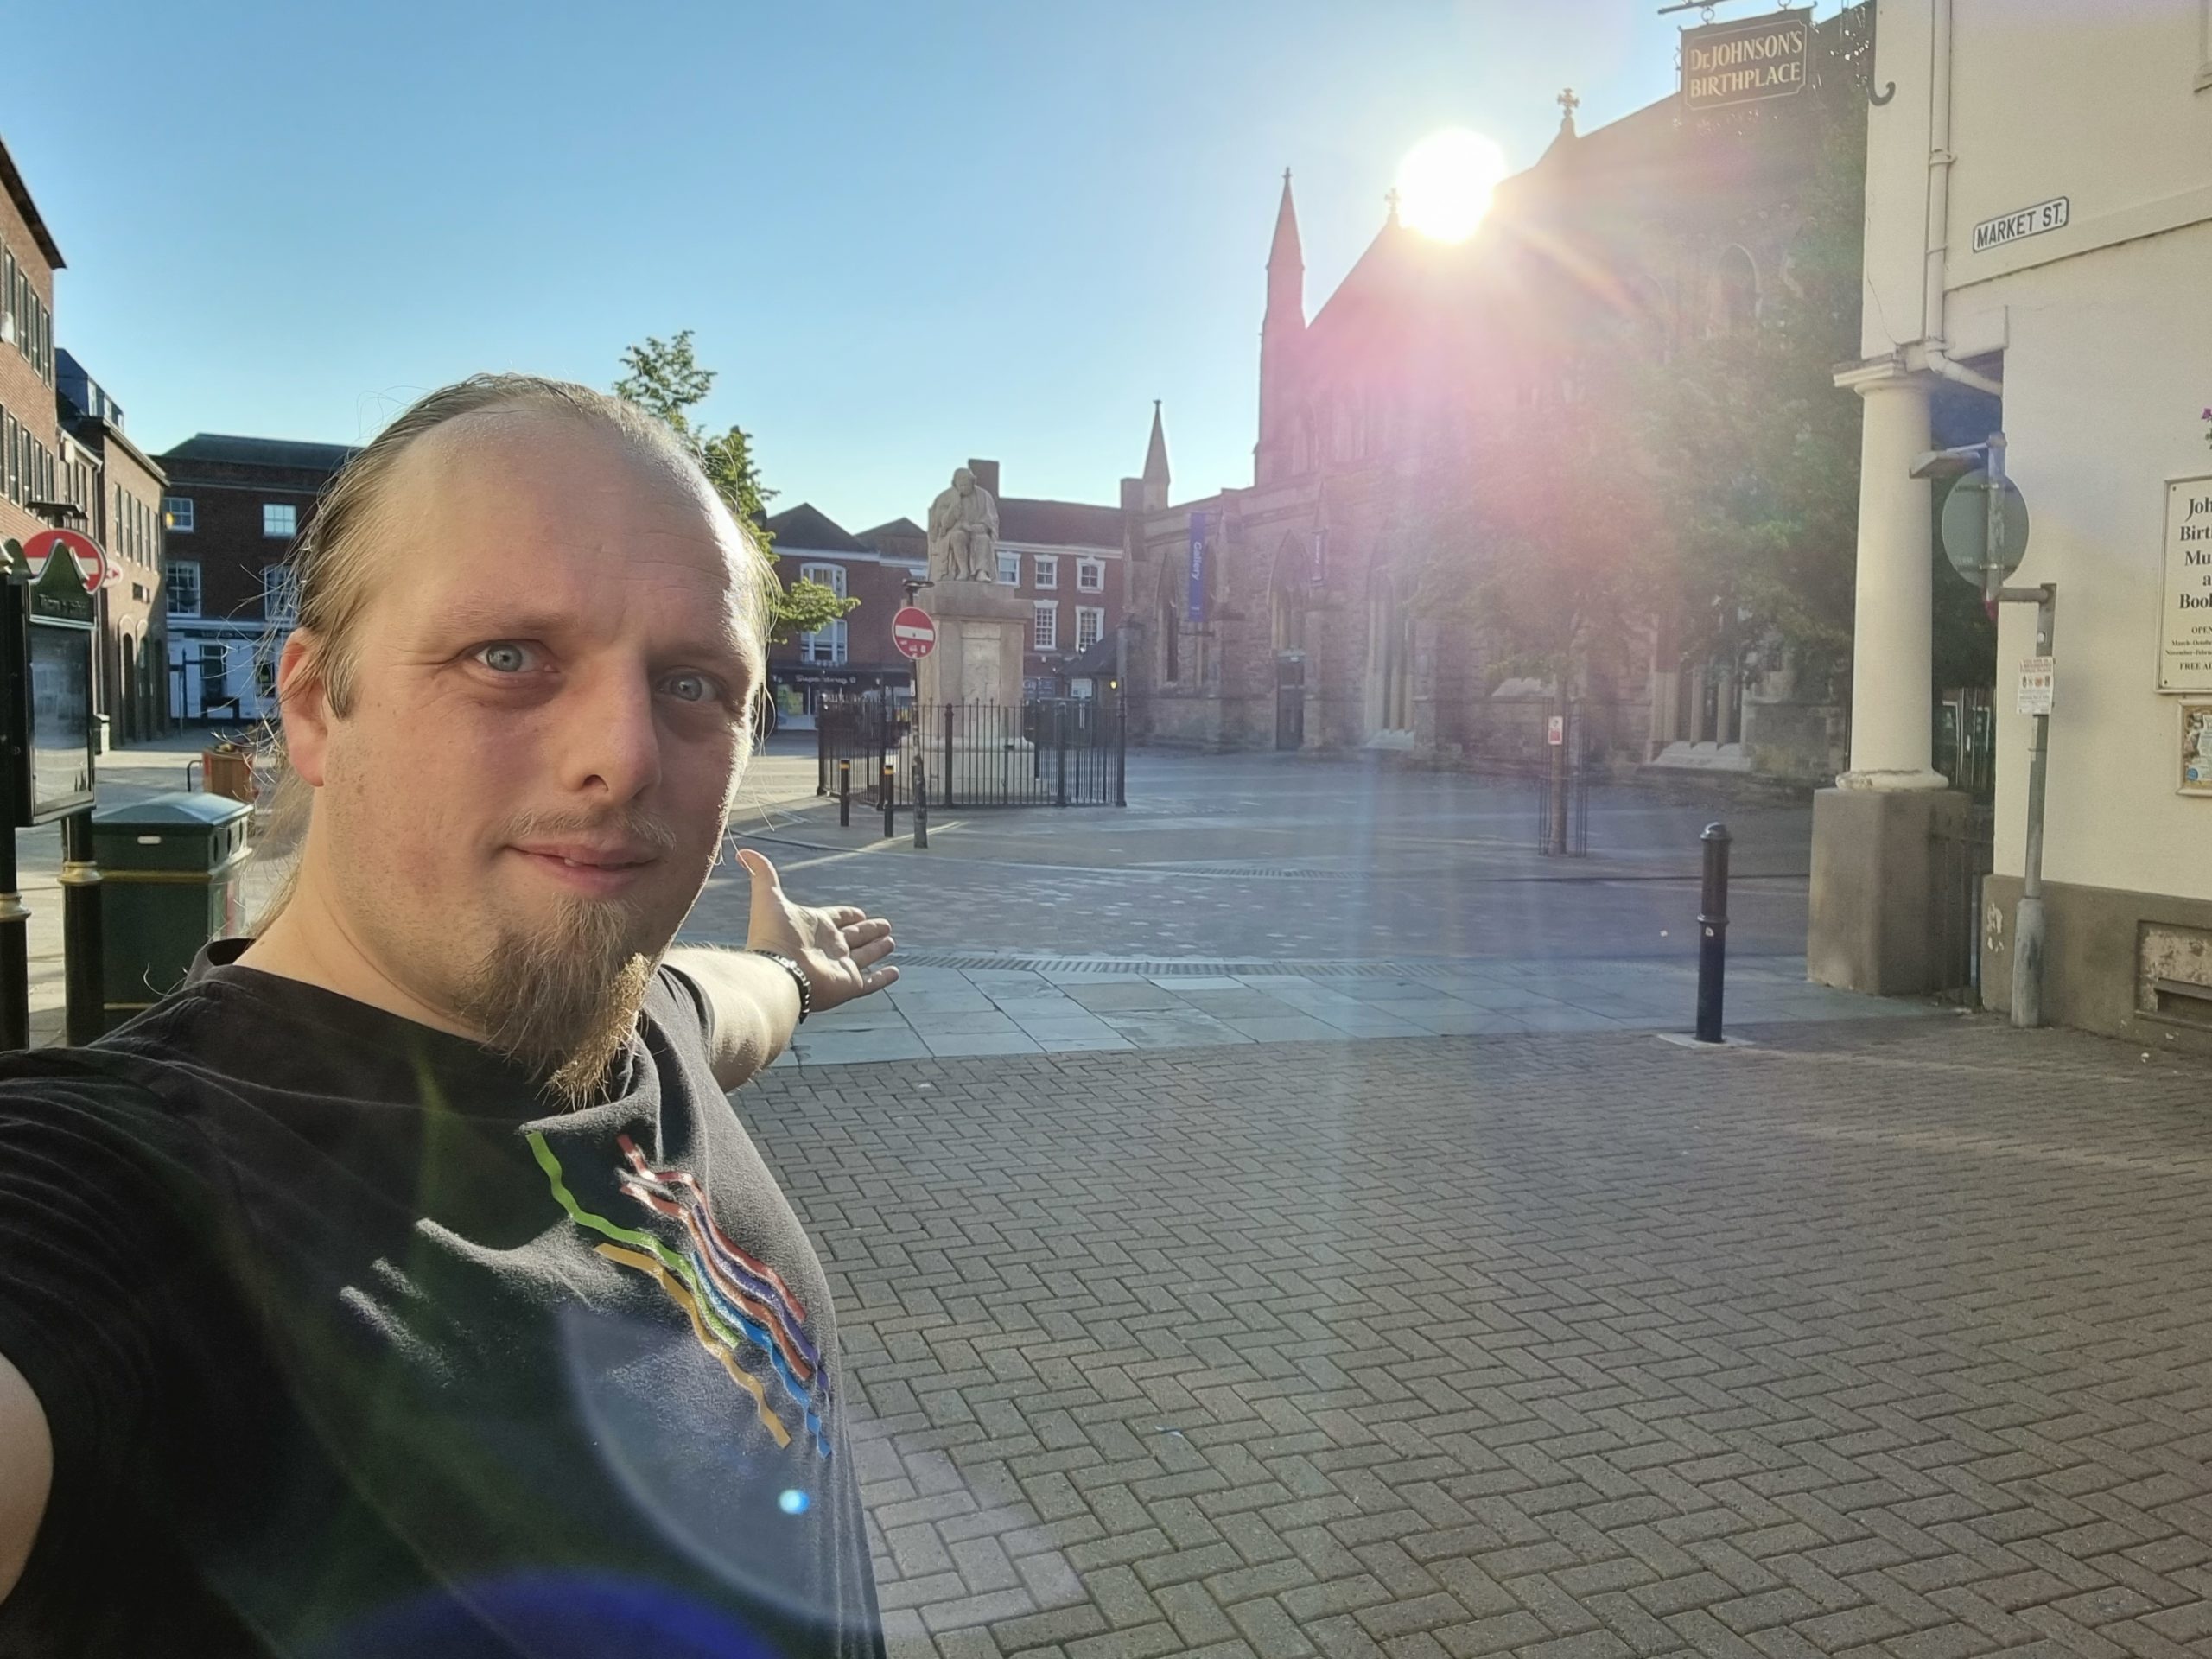 Dan near the corner of the Samuel Johnson Birthplace Museum in Lichfield, in a deserted public square early in the morning.